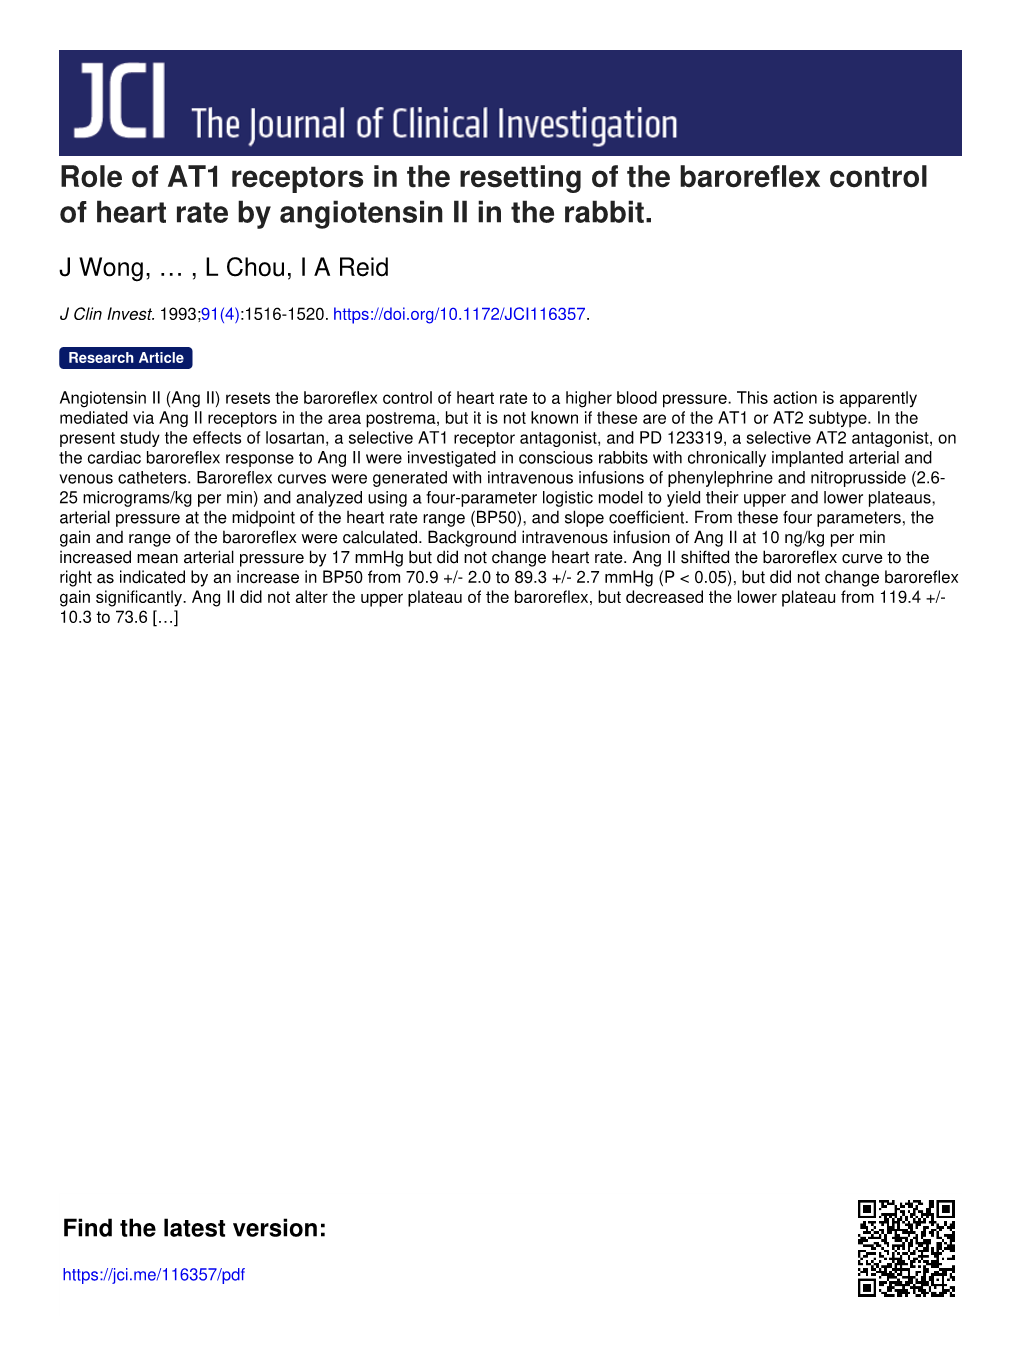 Role of AT1 Receptors in the Resetting of the Baroreflex Control of Heart Rate by Angiotensin II in the Rabbit